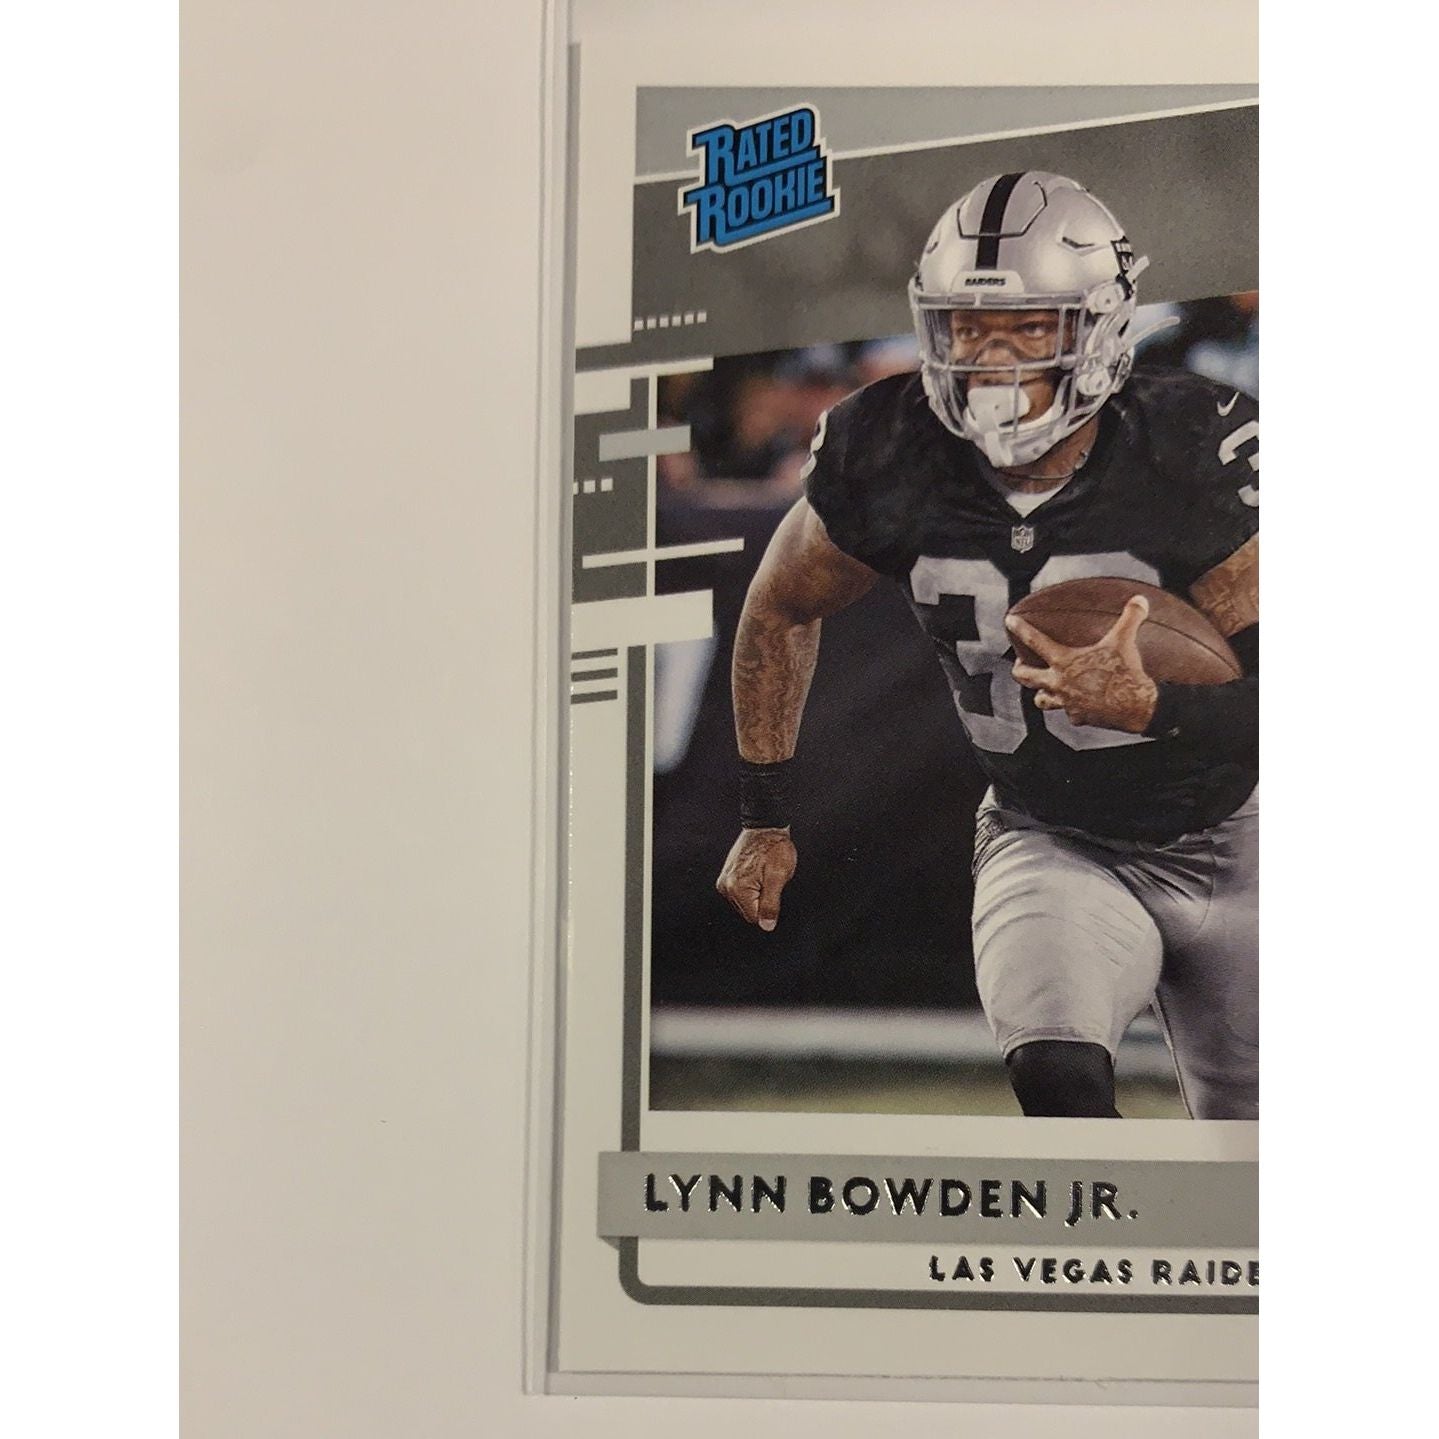  2020 Donruss Lynn Bowden Jr. Rated Rookie  Local Legends Cards & Collectibles